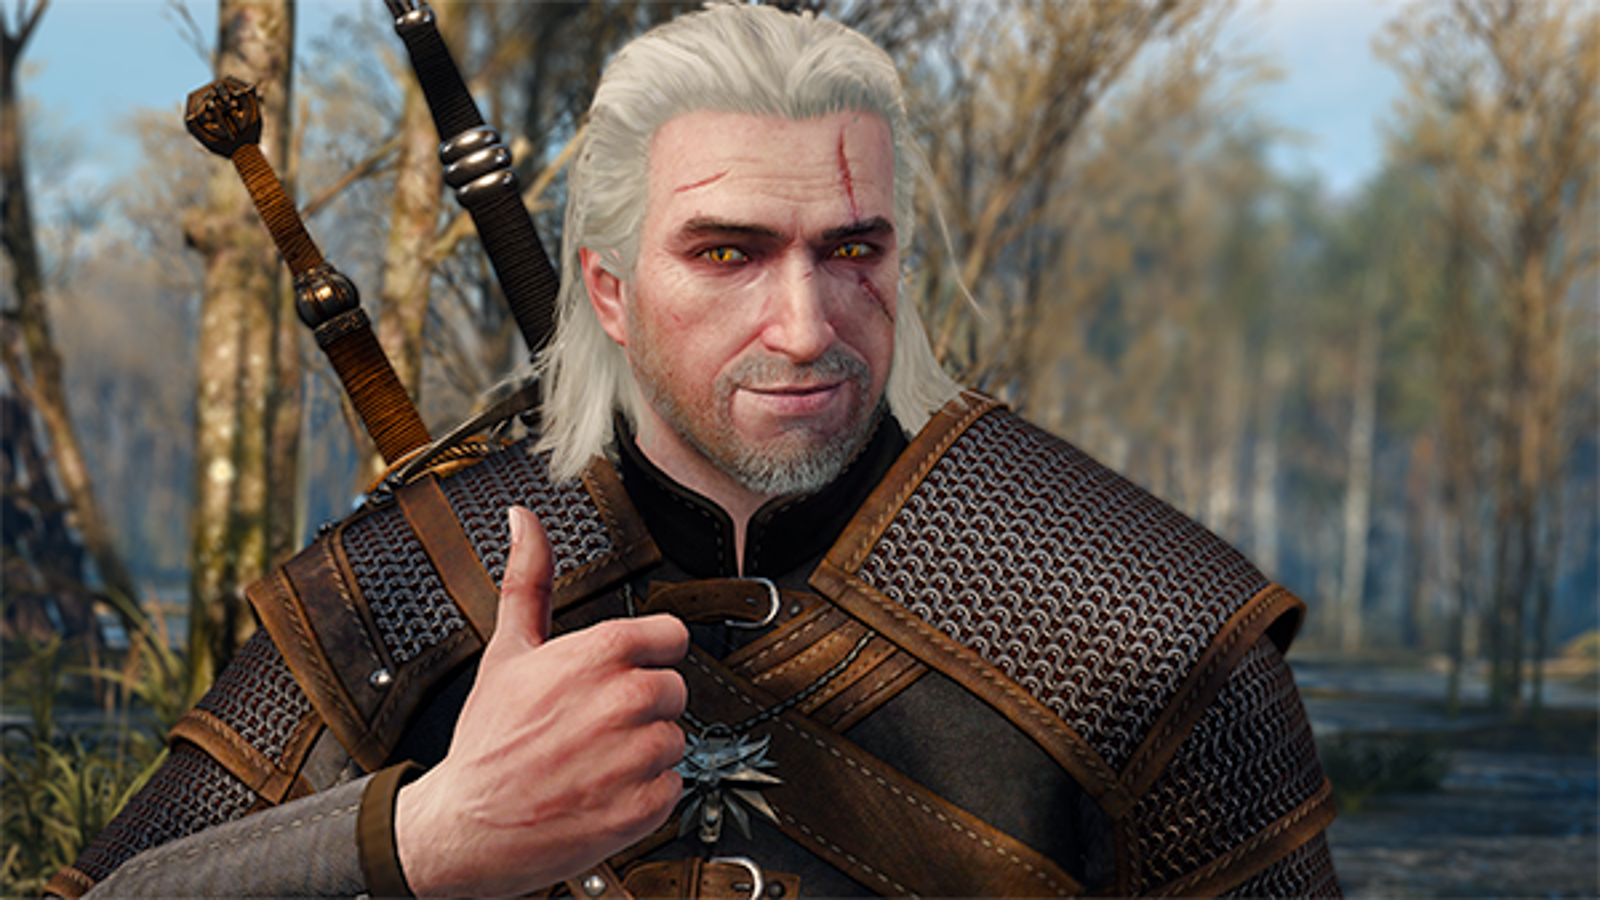 Witcher 3 Mods: Which are the Best in 2023 & How to Install